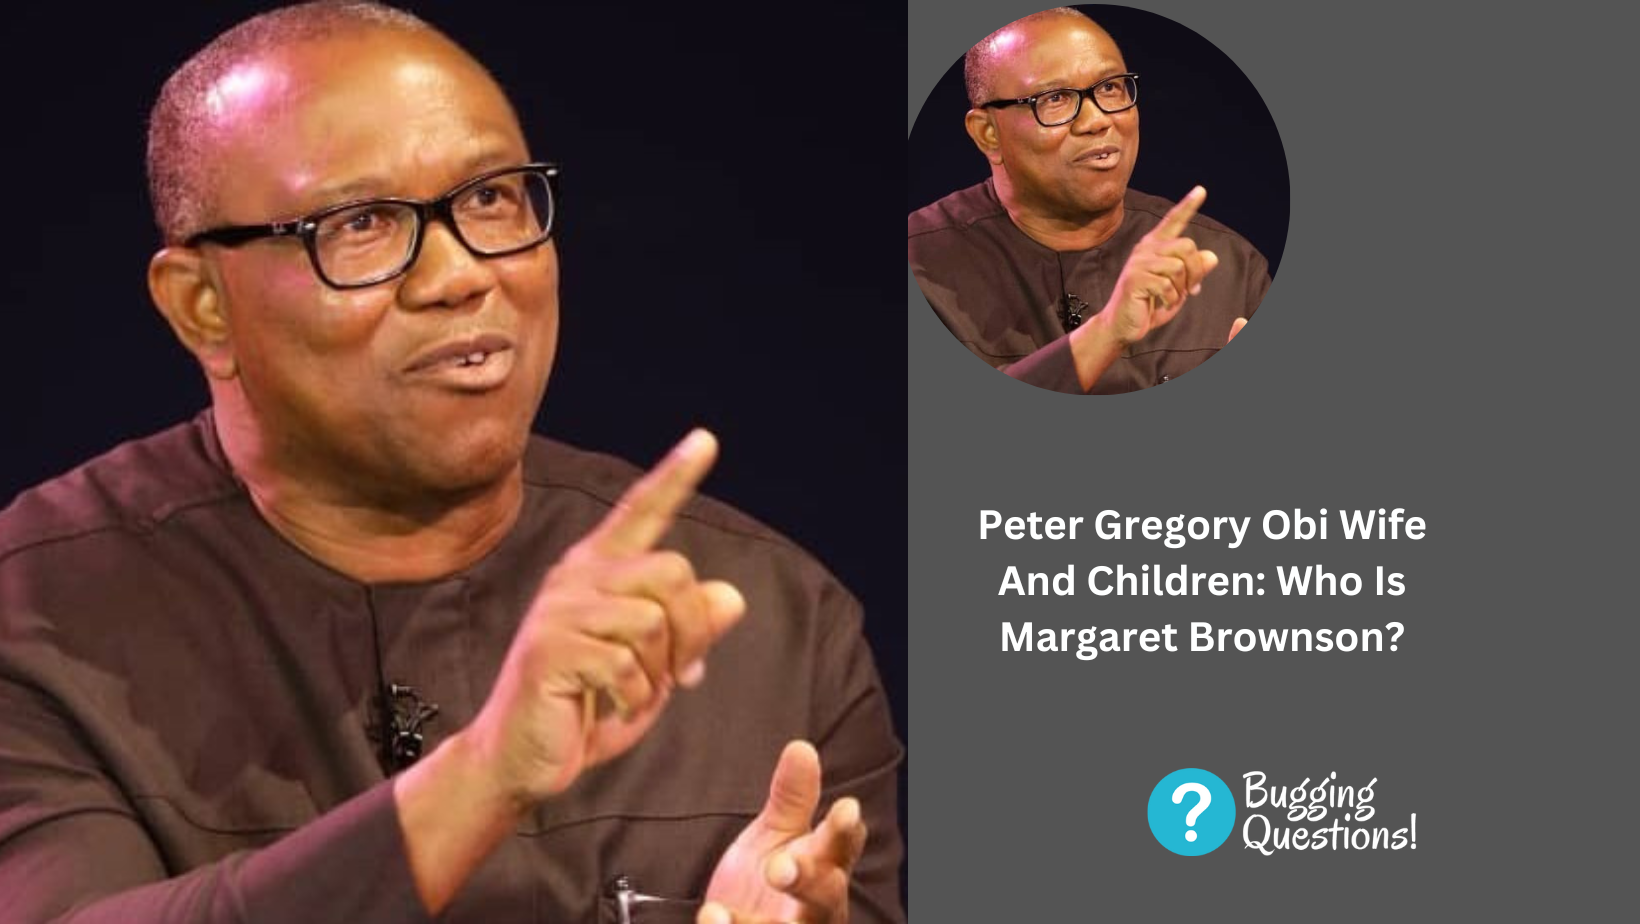 Peter Gregory Obi Wife And Children: Who Is Margaret Brownson?